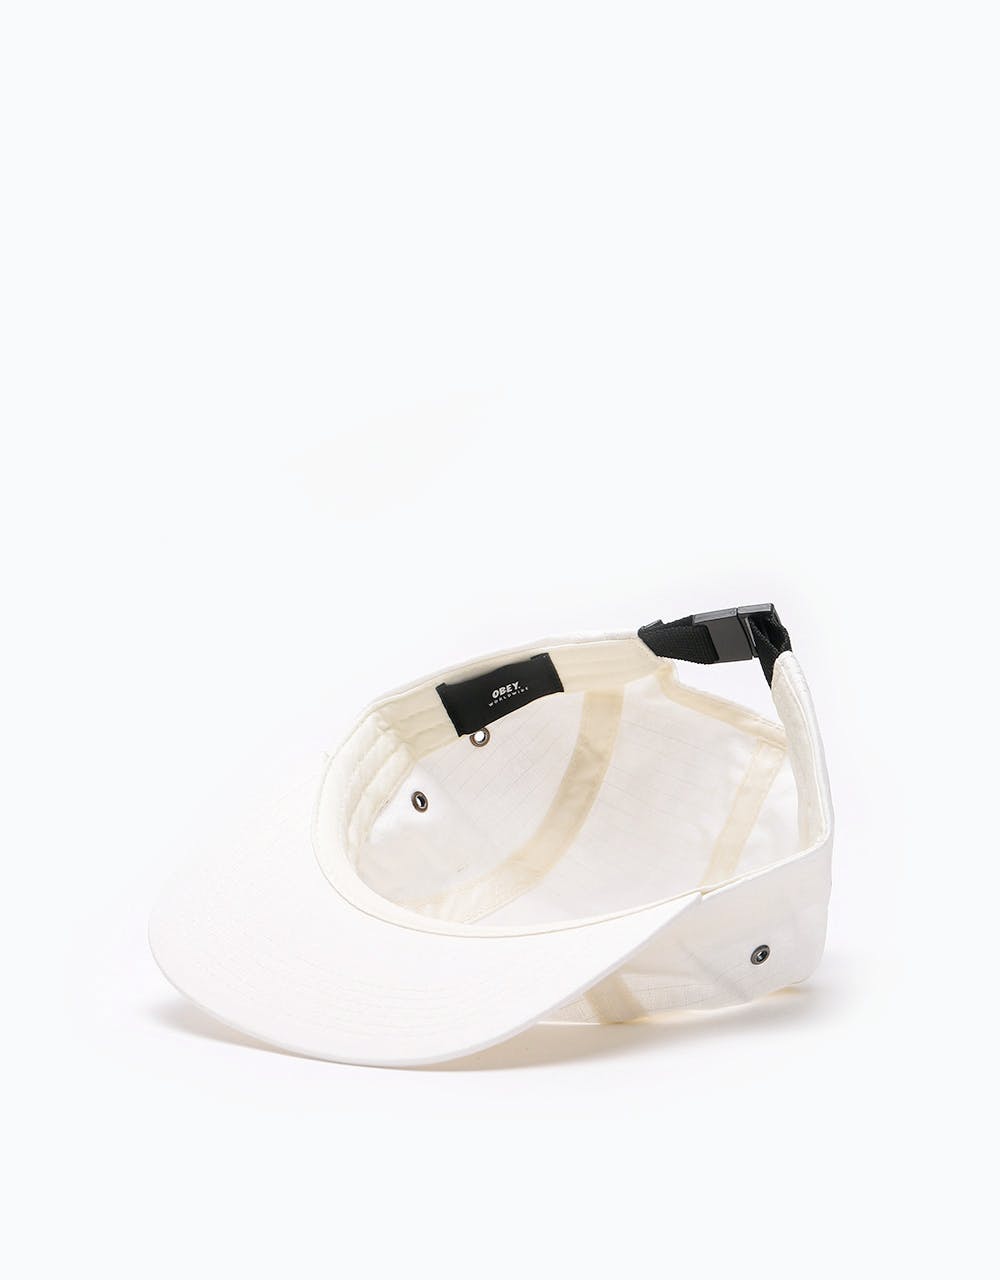 Obey Contorted II 5 Panel Cap - Off White